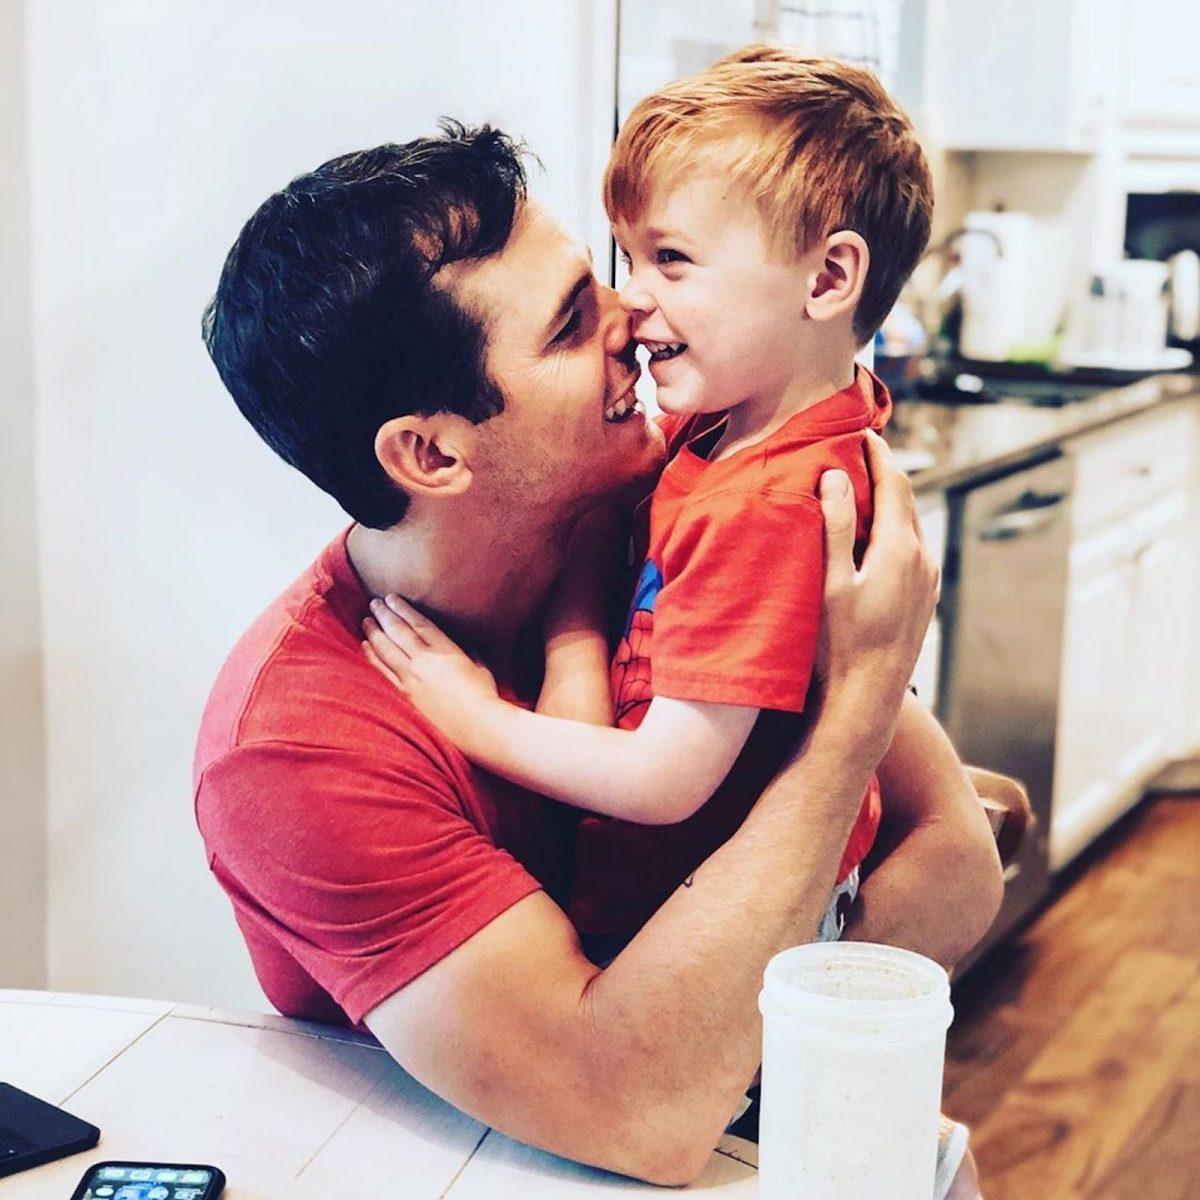 Country singer Granger Smith and his 3-year-old son, River. (Granger Smith/Instagram via CNN)